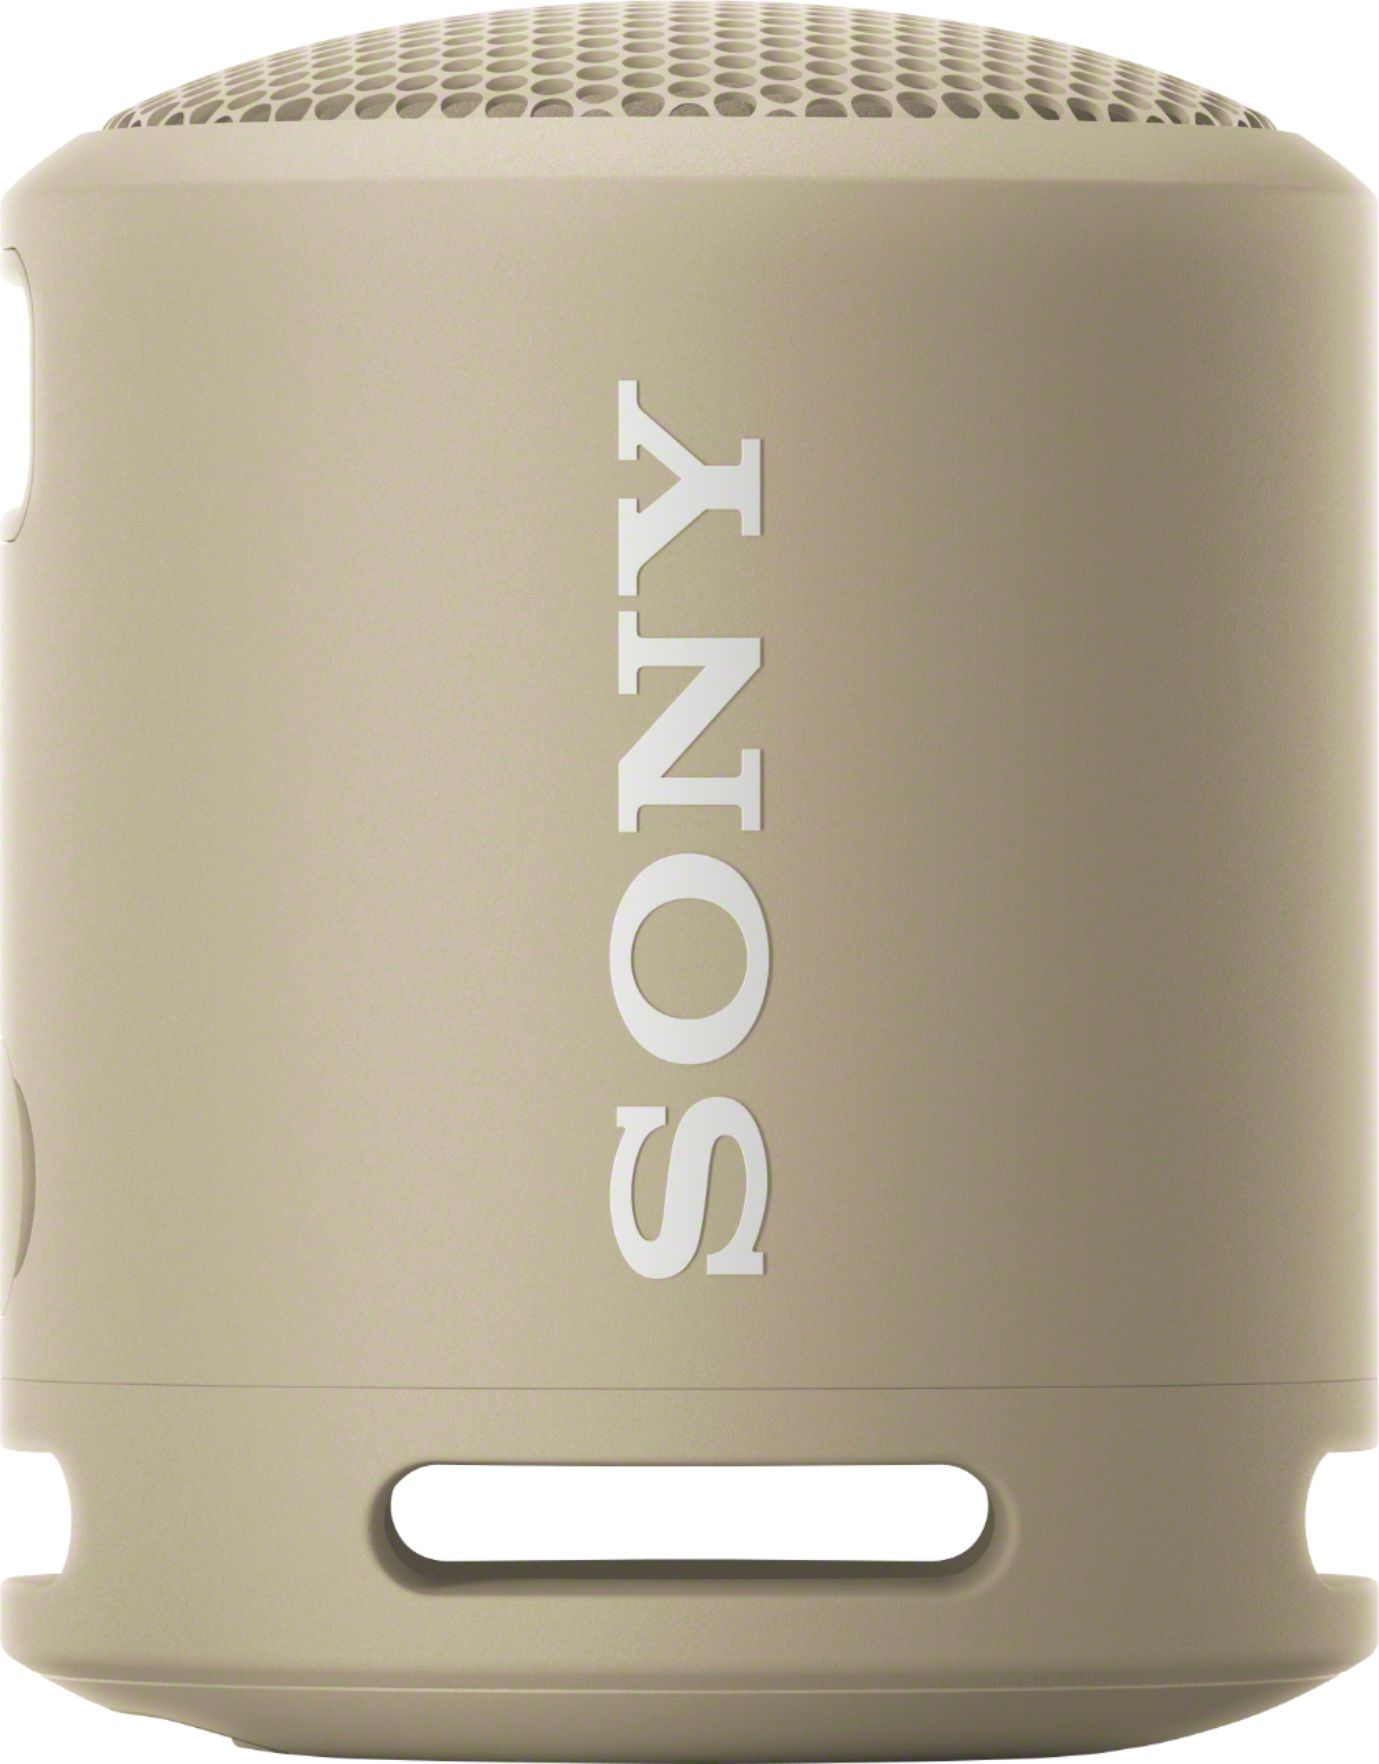 Sony EXTRA BASS Compact Portable Bluetooth Speaker Taupe SRSXB13/C - Best Buy | Best Buy U.S.